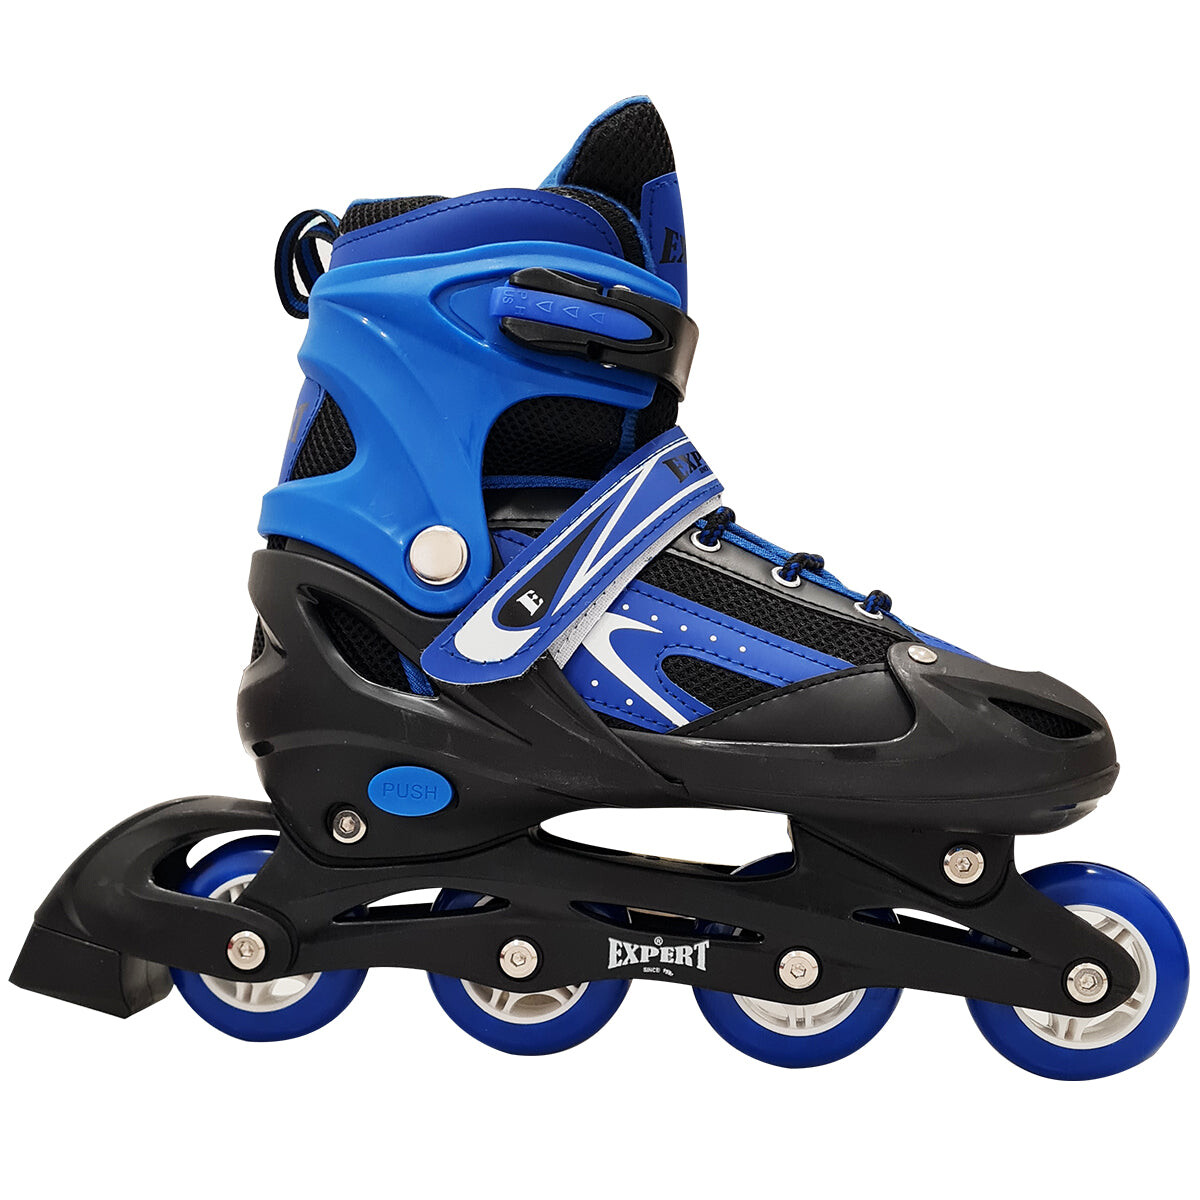 Patin Rollers Extensible Excelente Talles Y Colores 